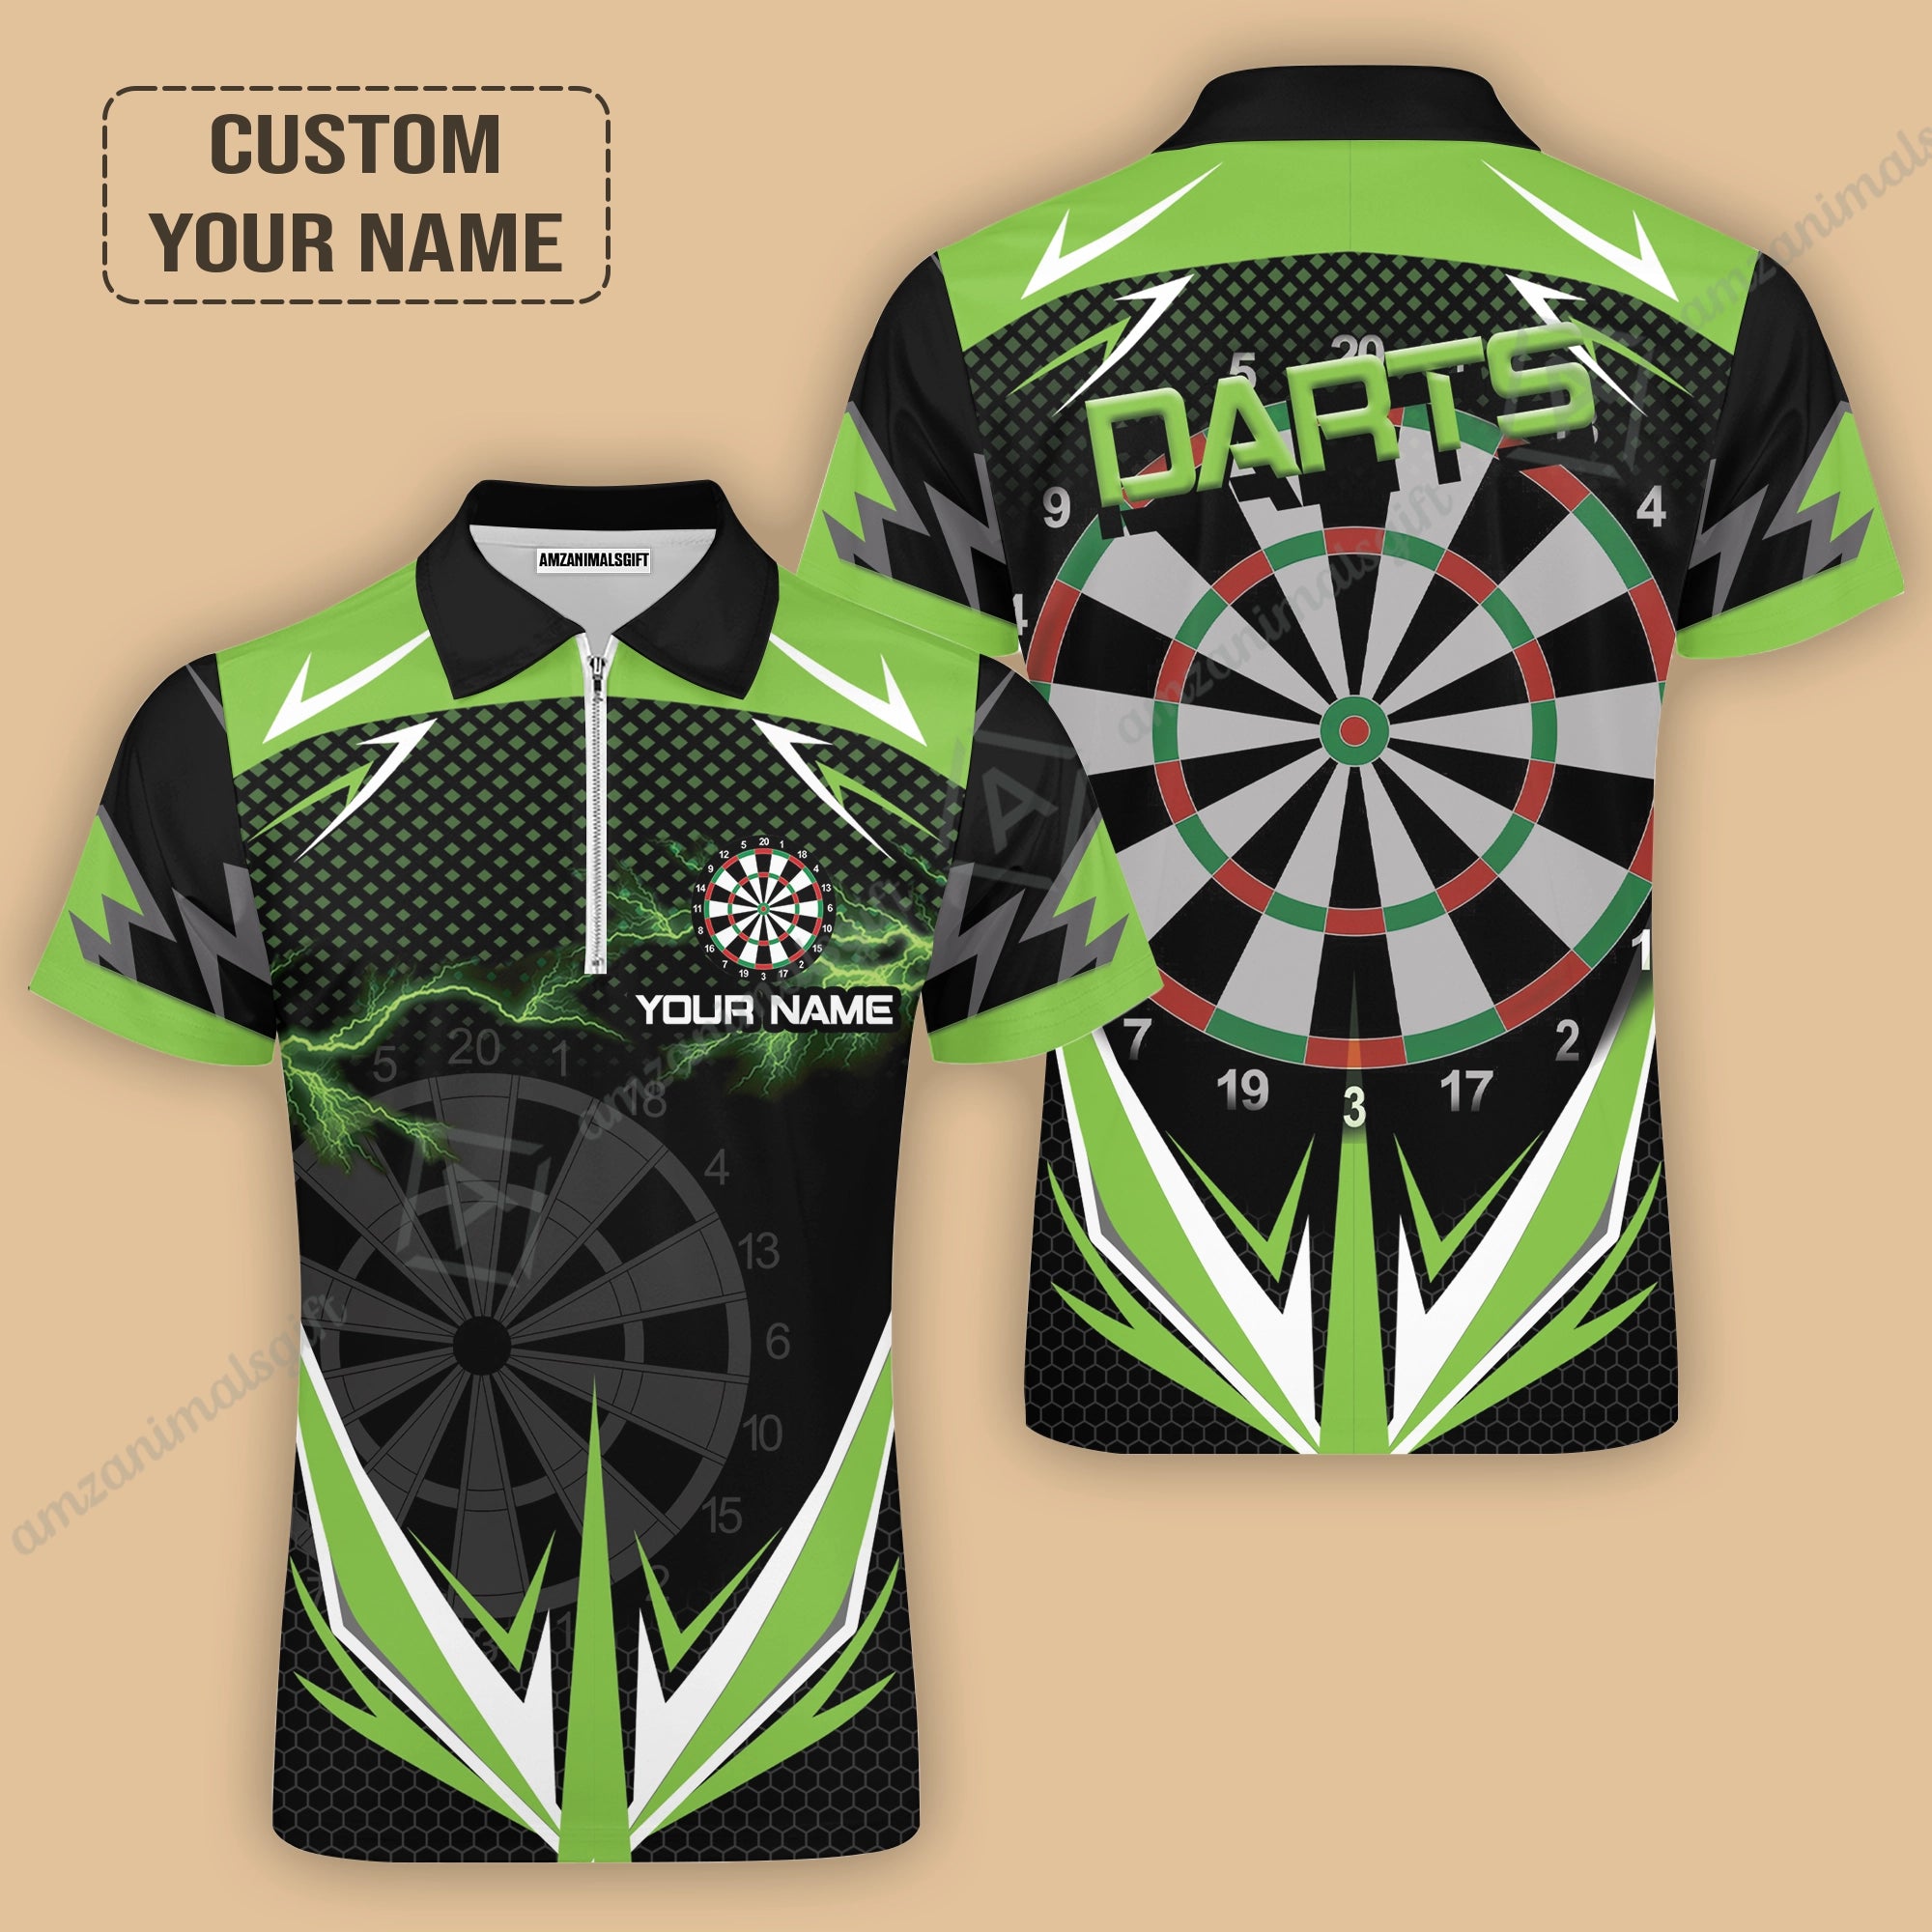 Customized Darts Jersey, Green Darts Lightning Personalized Name Zip Polo Shirt, Outfits For Darts Lovers, Darts Players